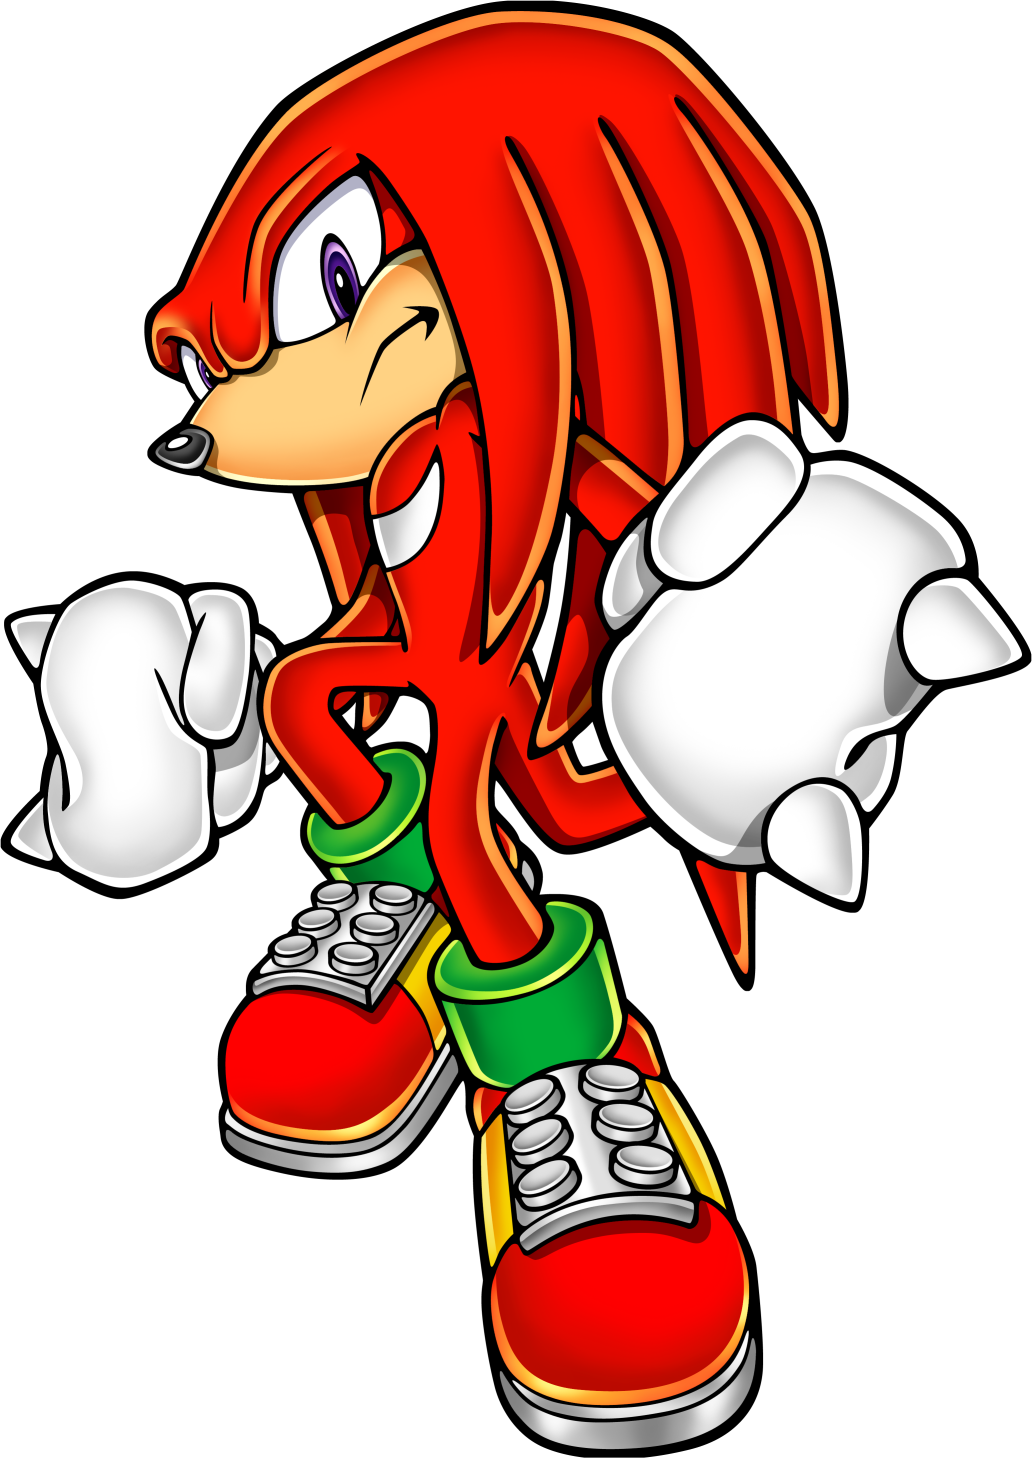 Knuckles the Echidna.